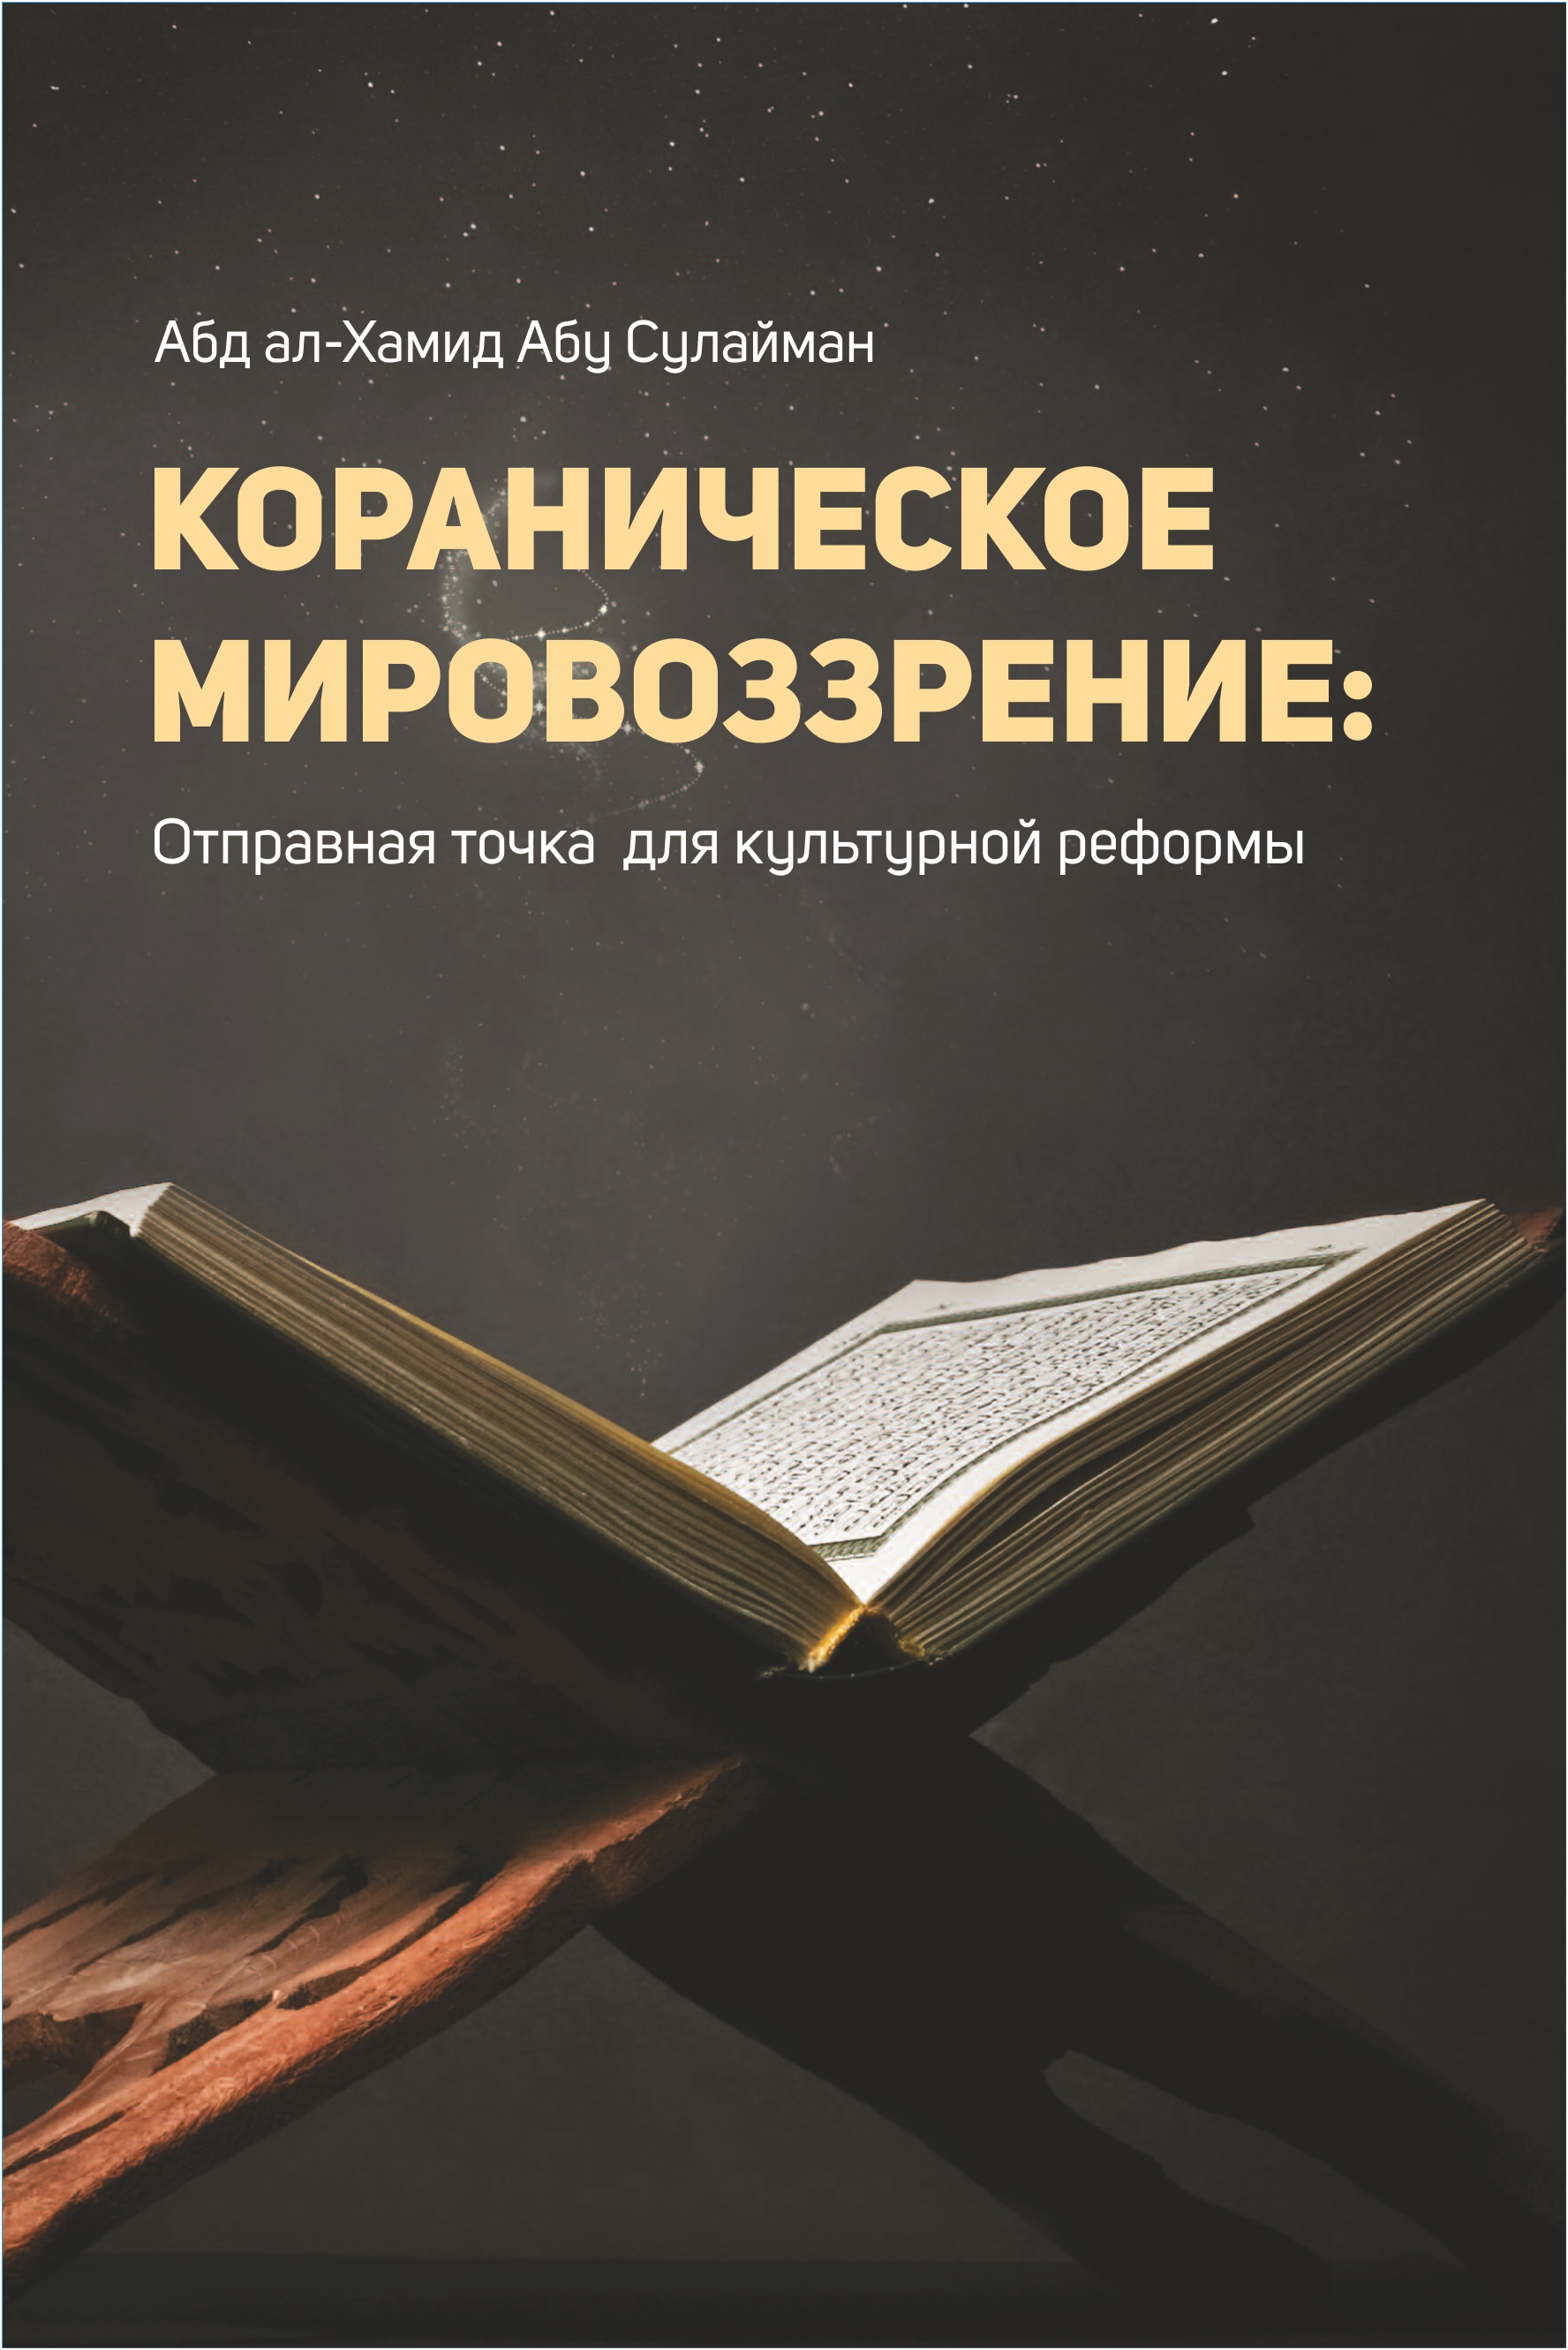 Russian Translation of The Qur’anic Worldview